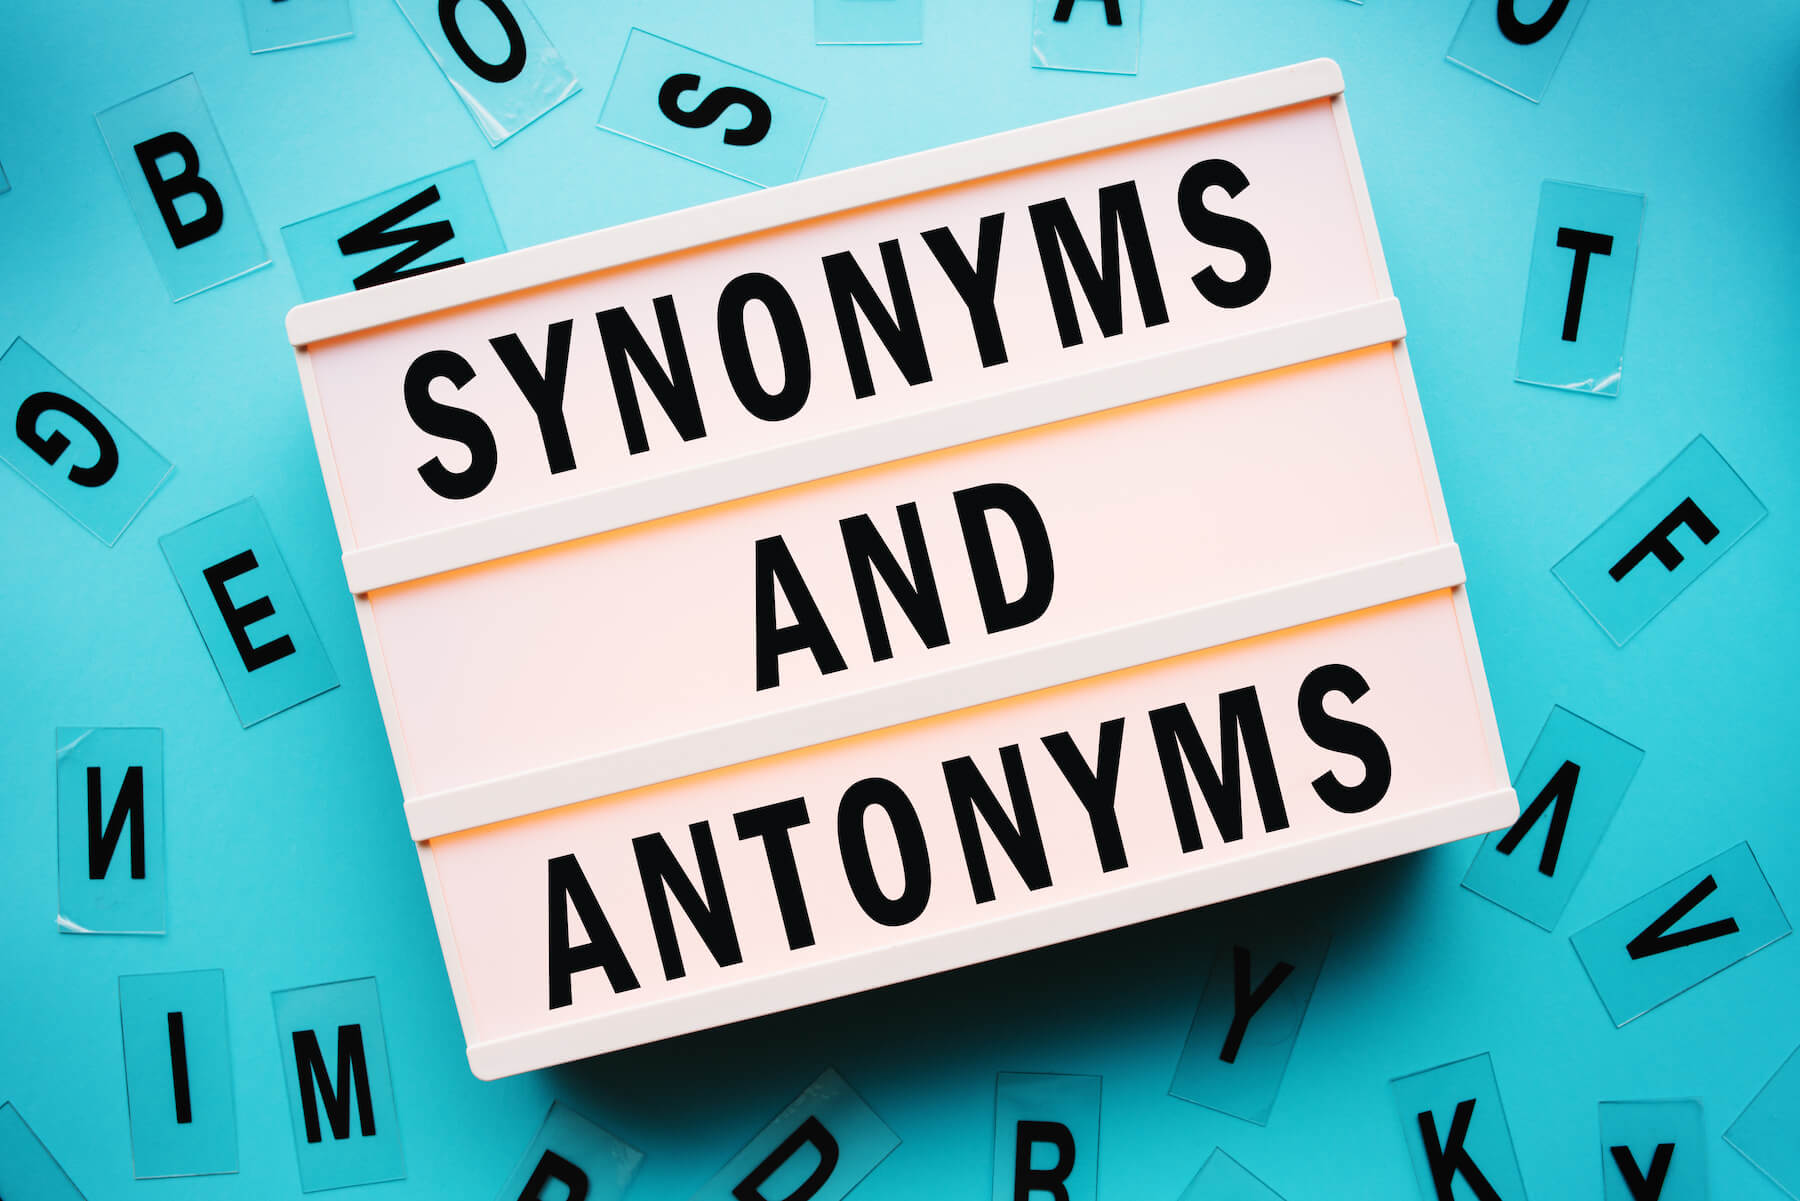 Synonyms and Antonyms - Grade 11 - Quizizz